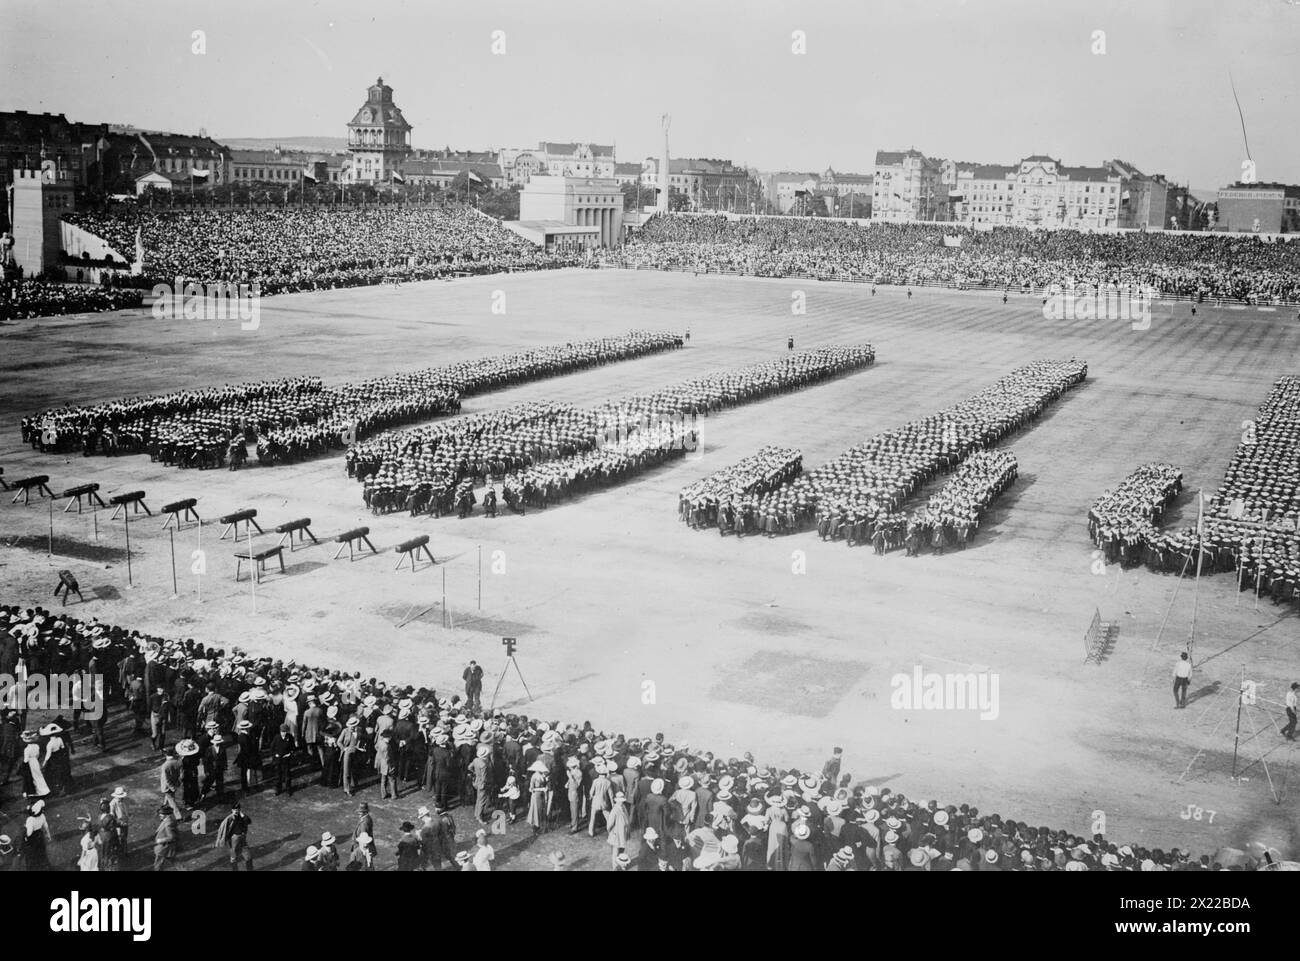 6000 girls at Sokol Sports at Prague, Austria, 1912. Shows young women standing in formation, probably during the 6th Sokol Slet (gymnastic festival) held in 1912 in Prague (then part of the Austro-Hungarian Empire, now located in the Czech Republic). Stock Photo